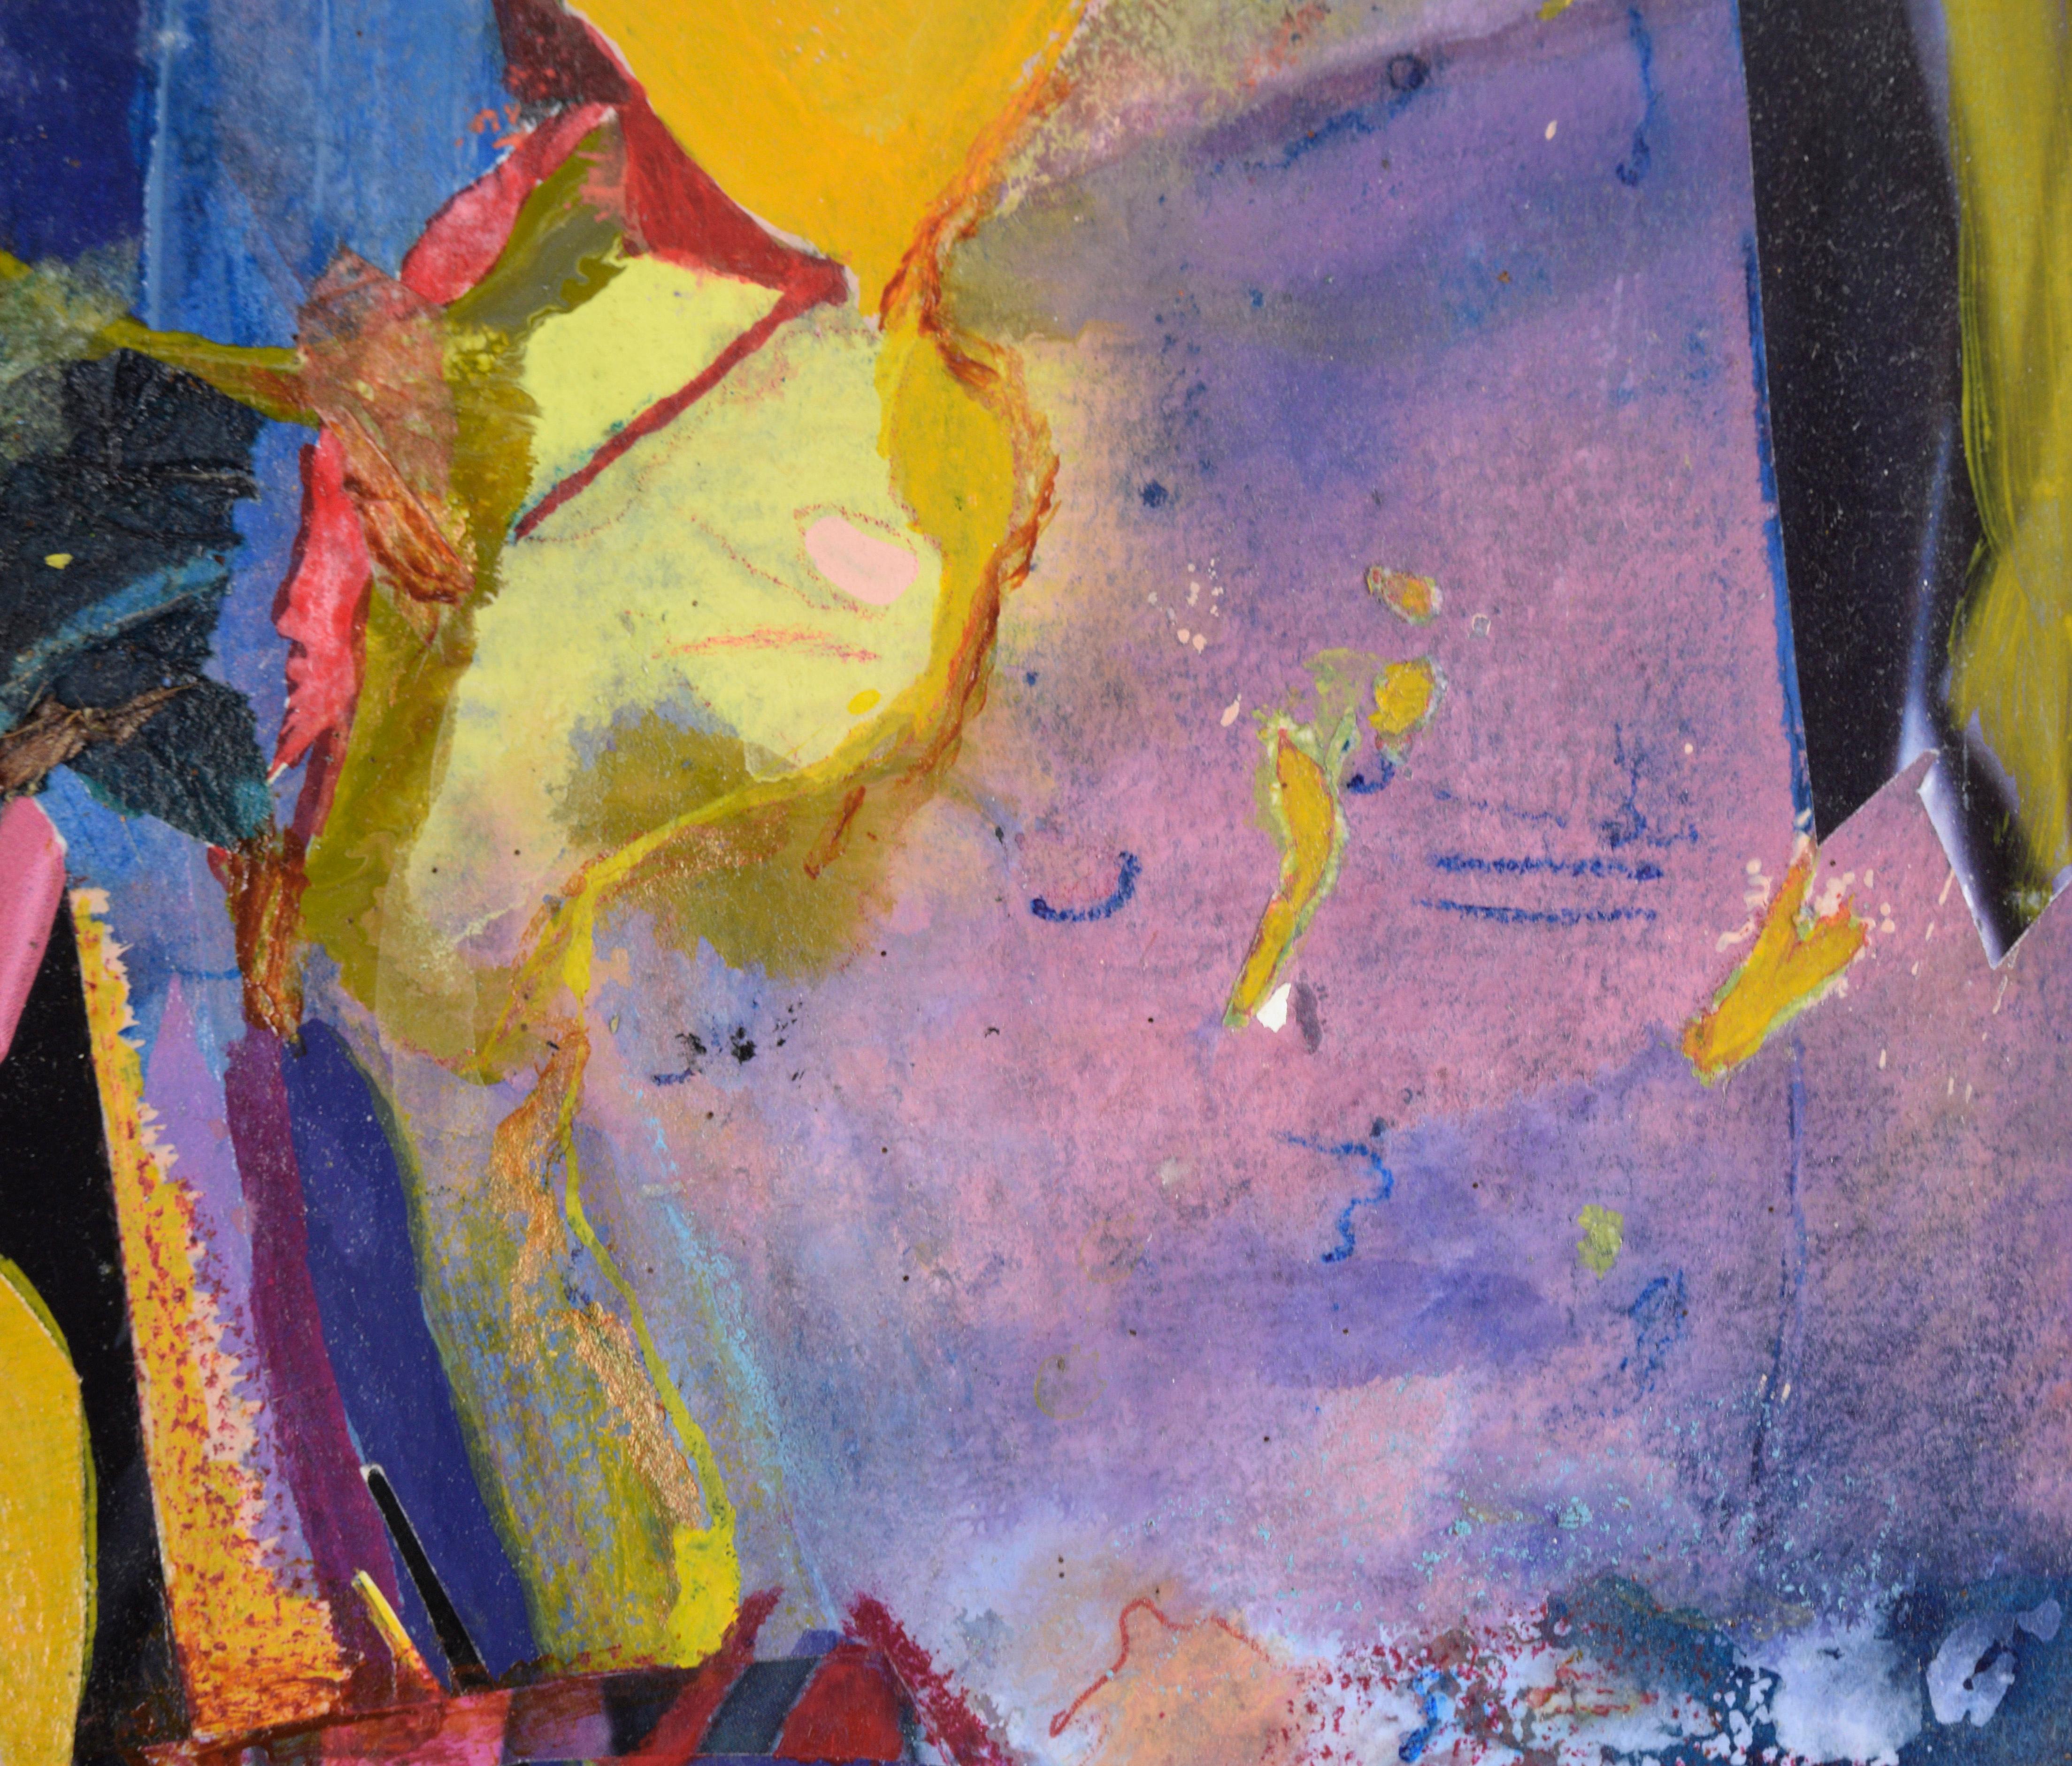 Carnival Abstract in Blue, Magenta, and Yellow - Oil and Collage on Paper - Abstract Expressionist Painting by Jennie Rafton